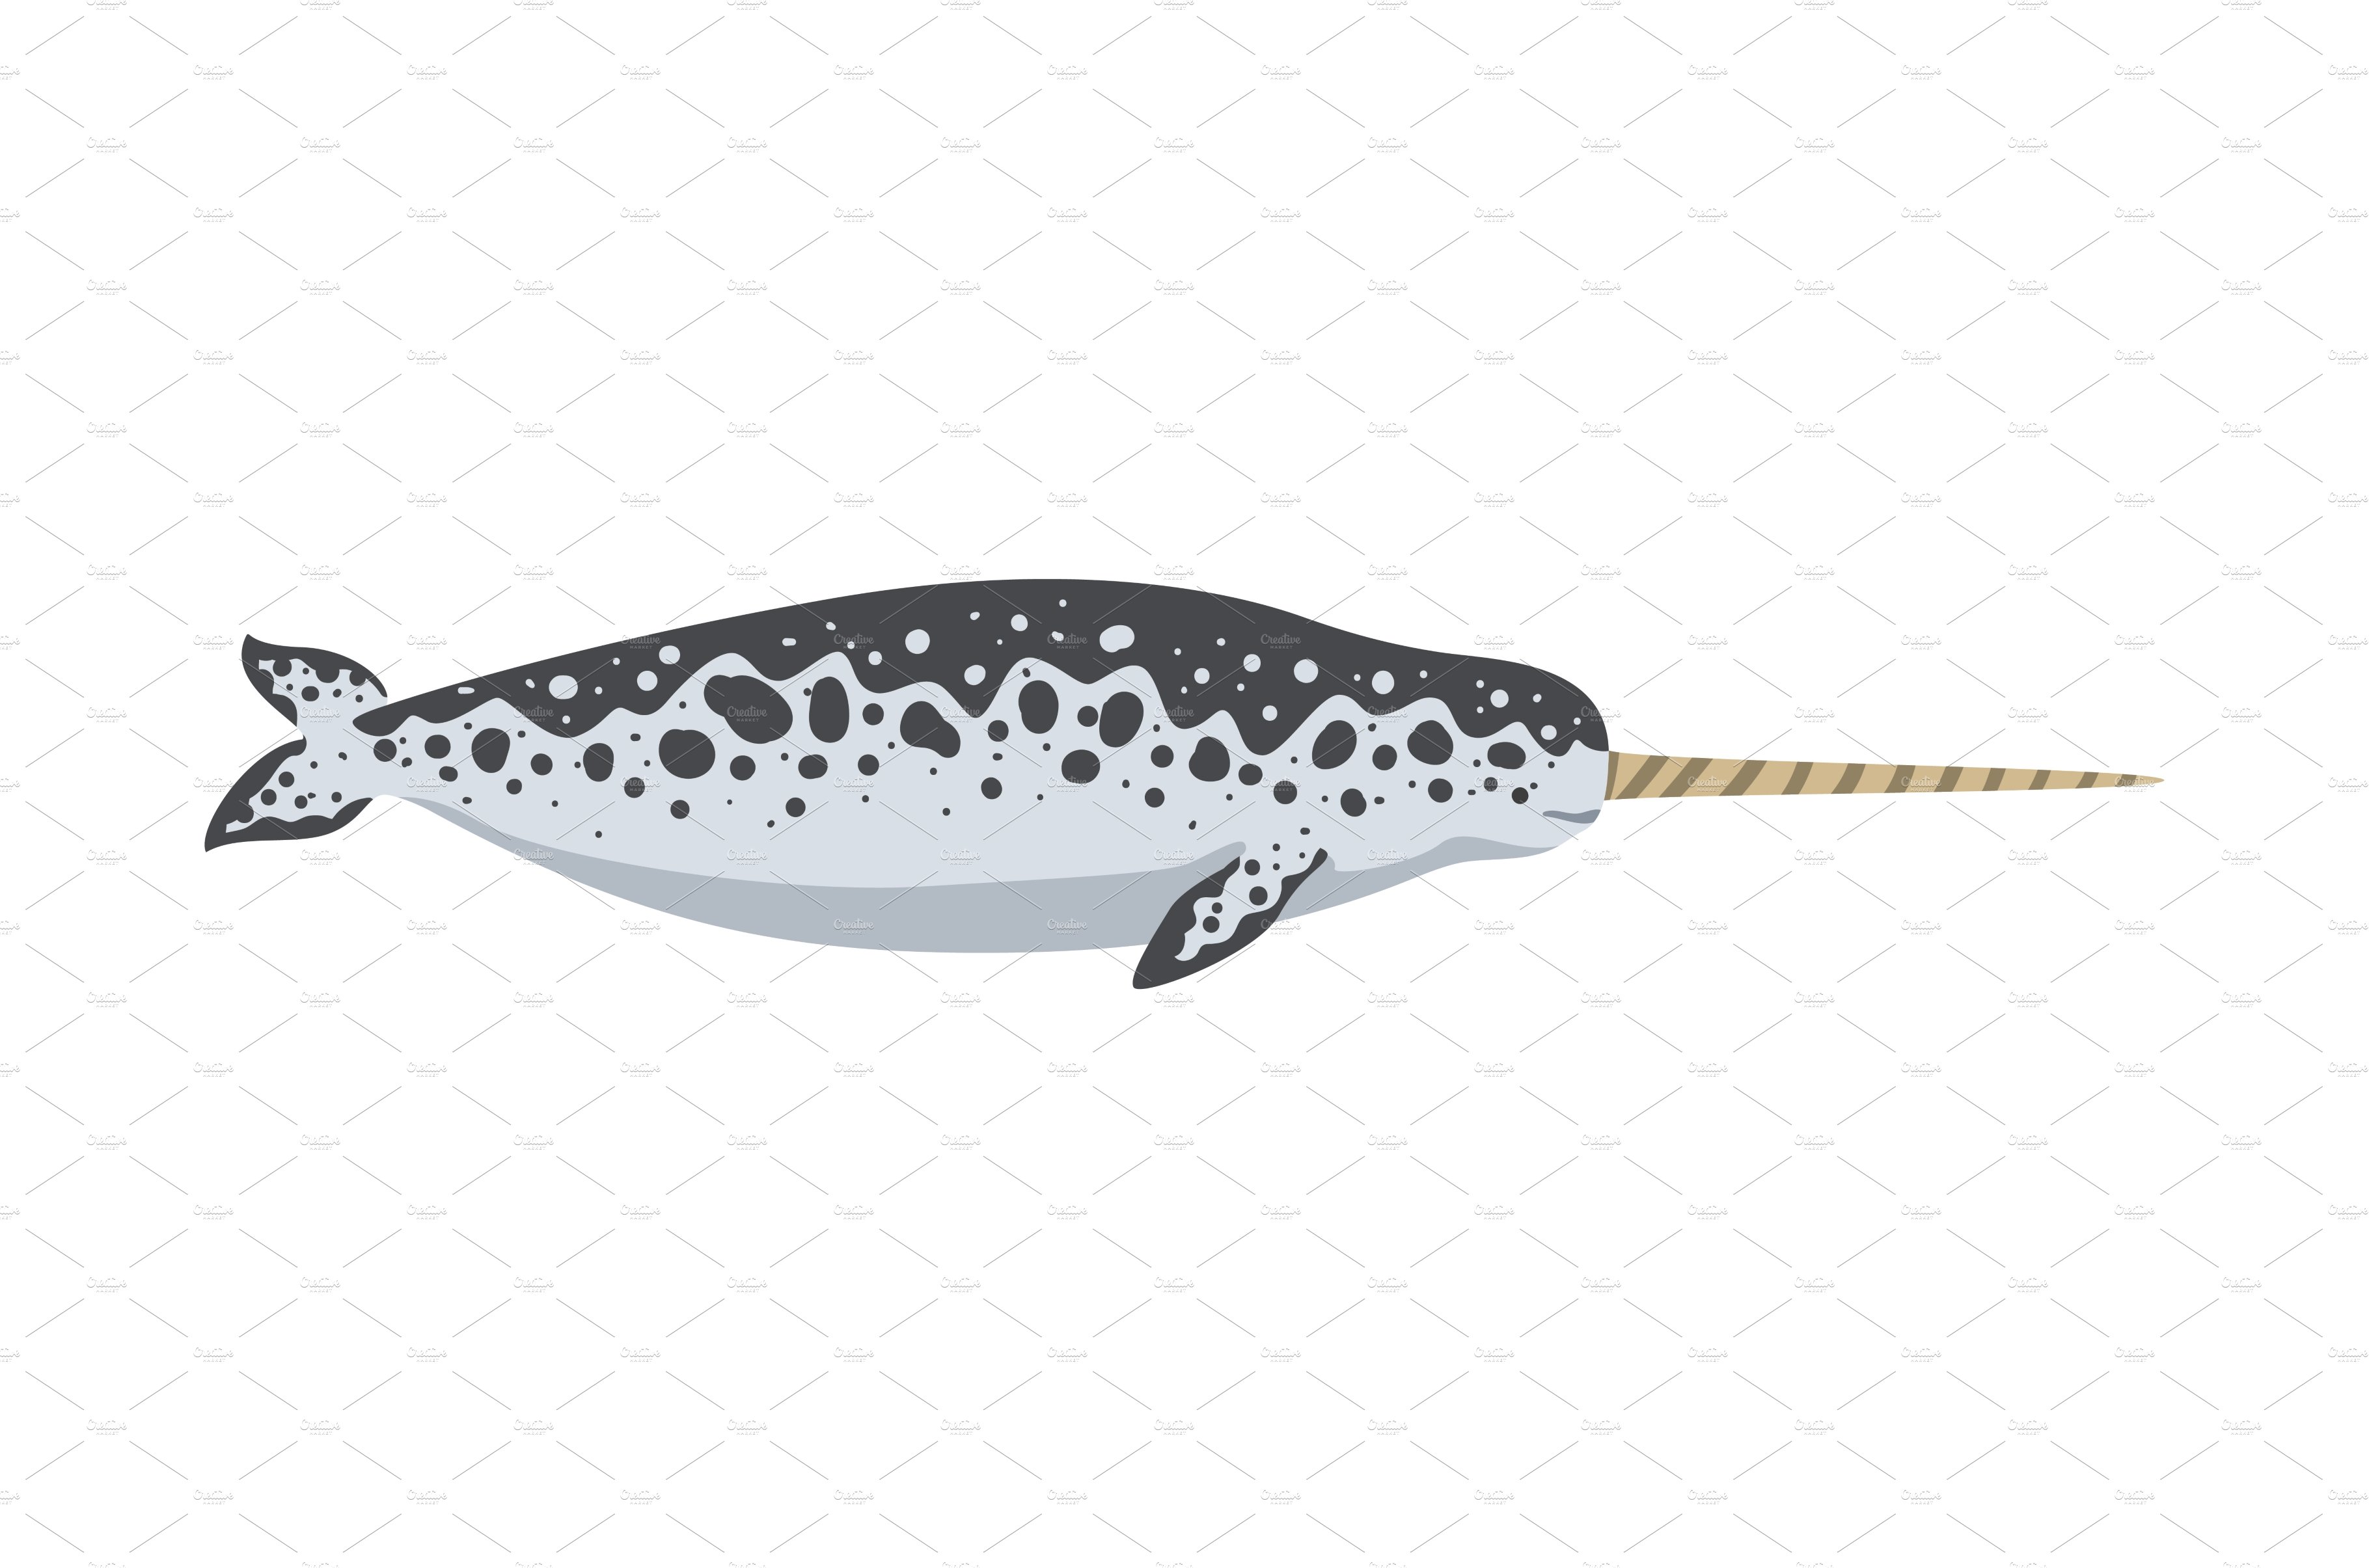 Narwhal Marine Arctic Animal, Wild cover image.